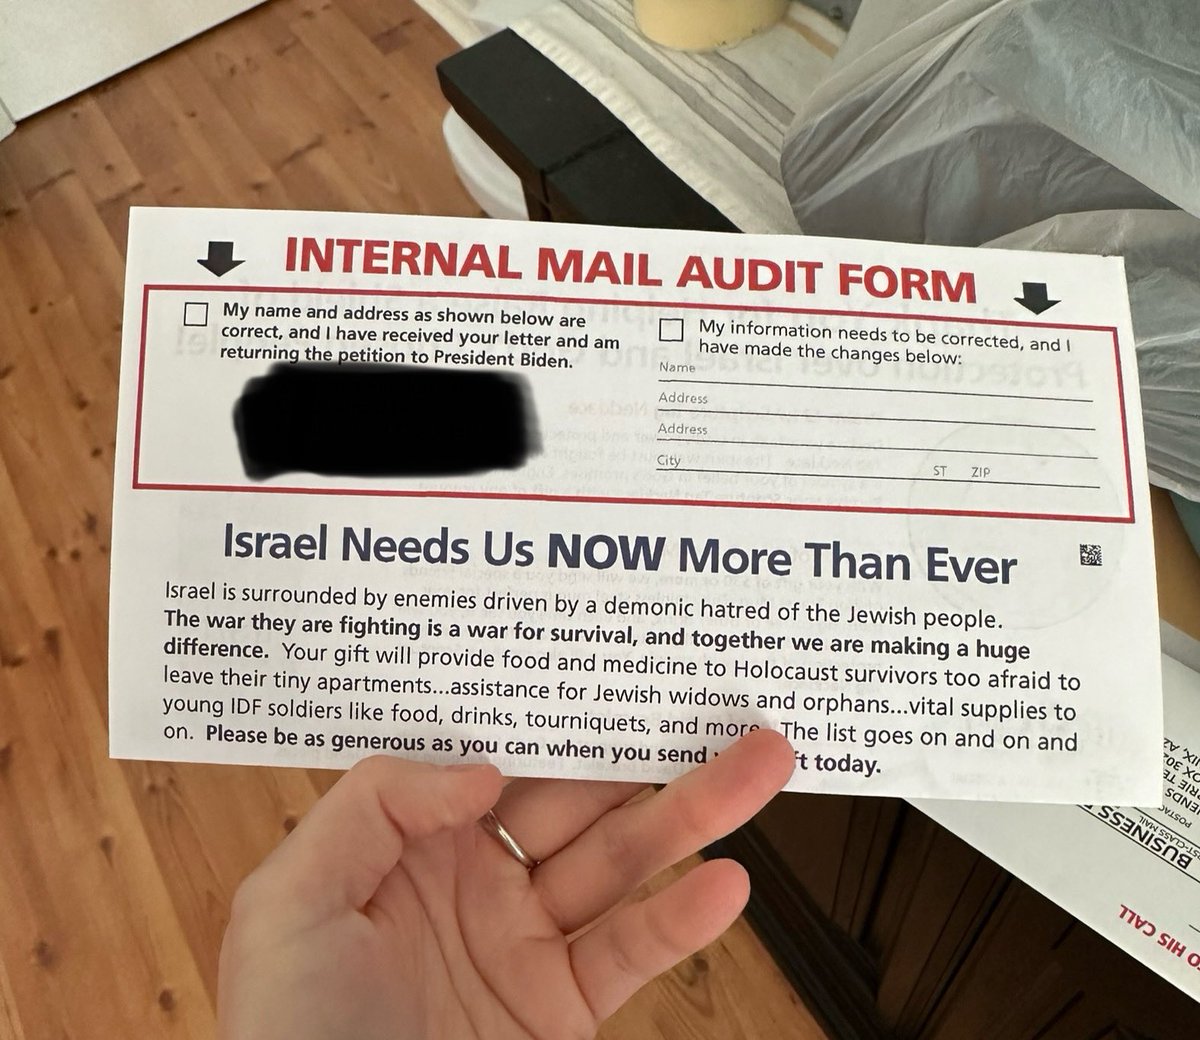 This is a fucking joke I cannot believe I just got this in the mail